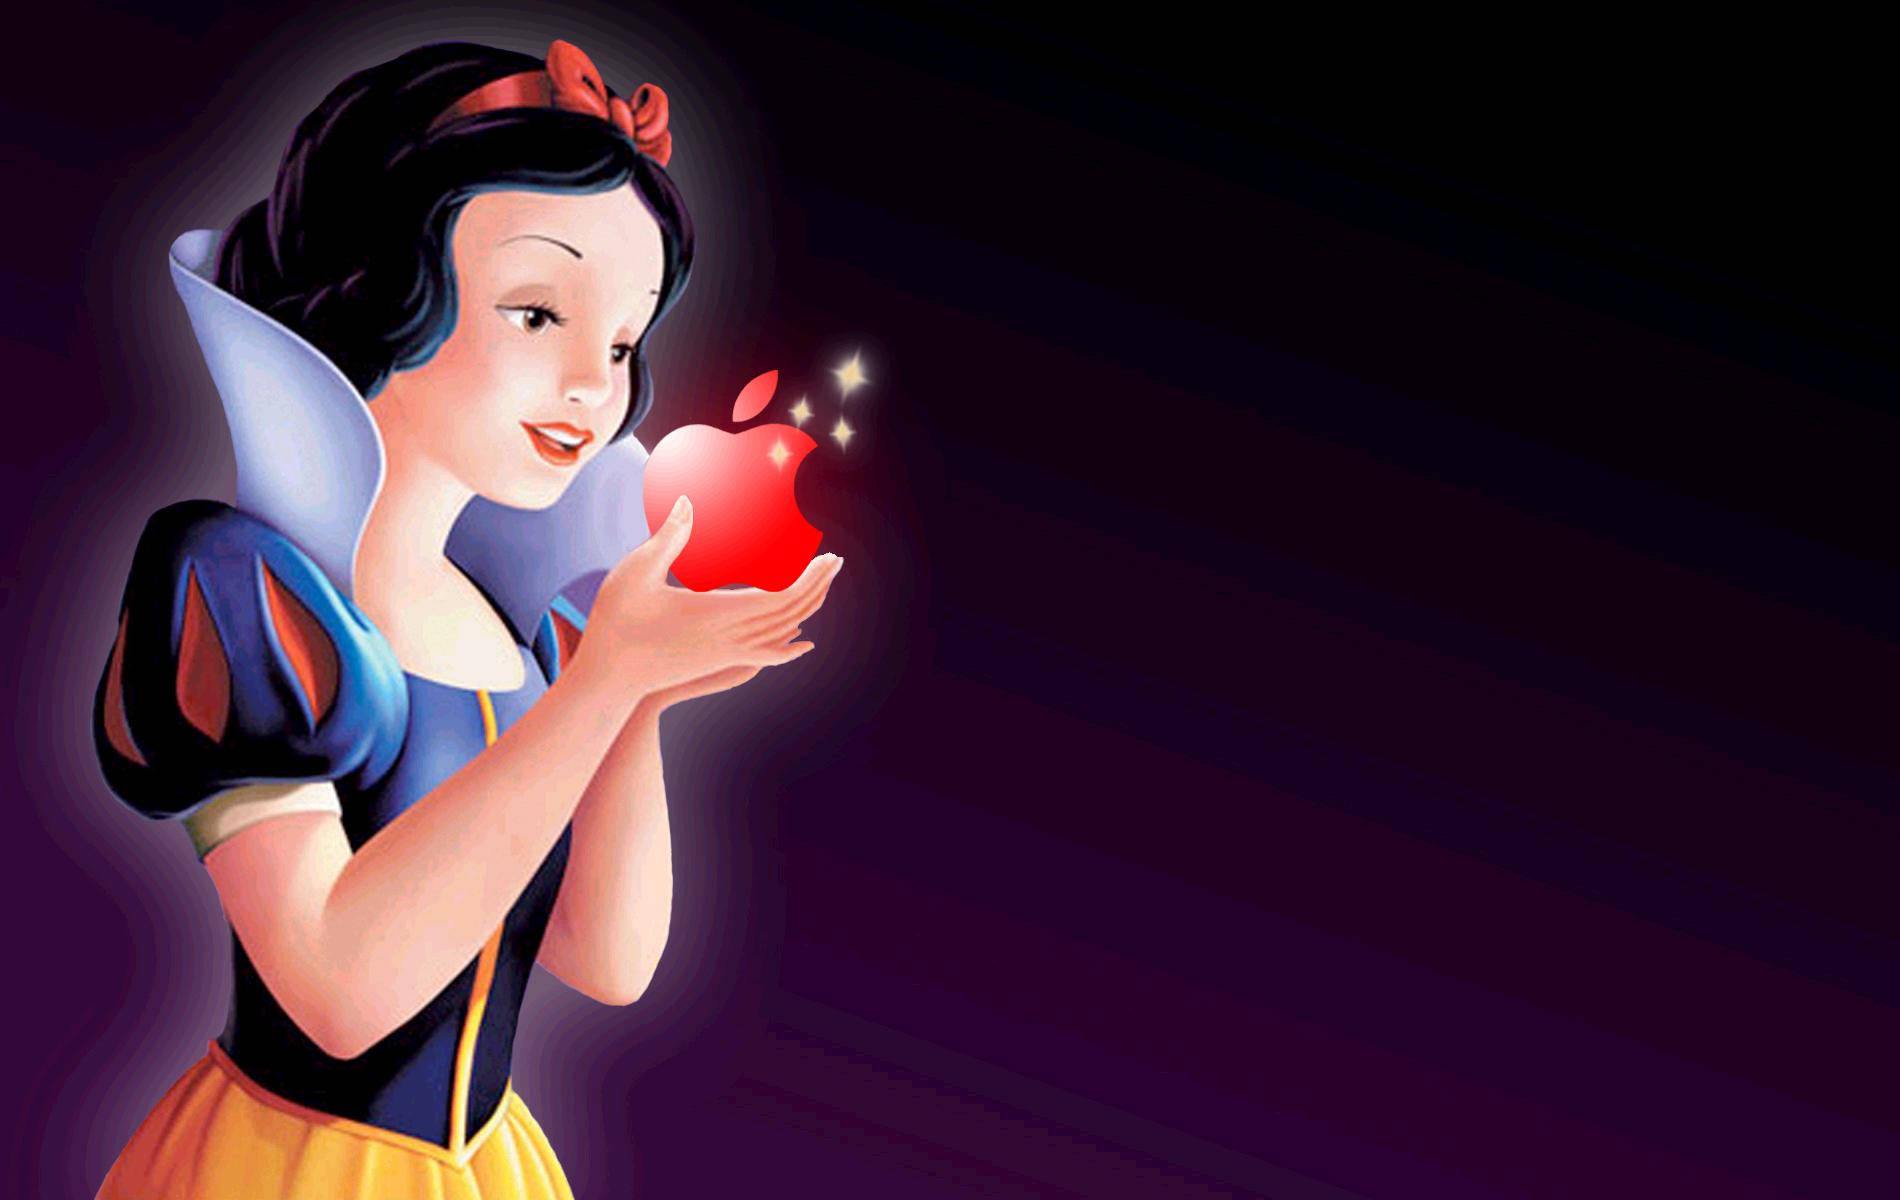 Snow White Graphic Poster